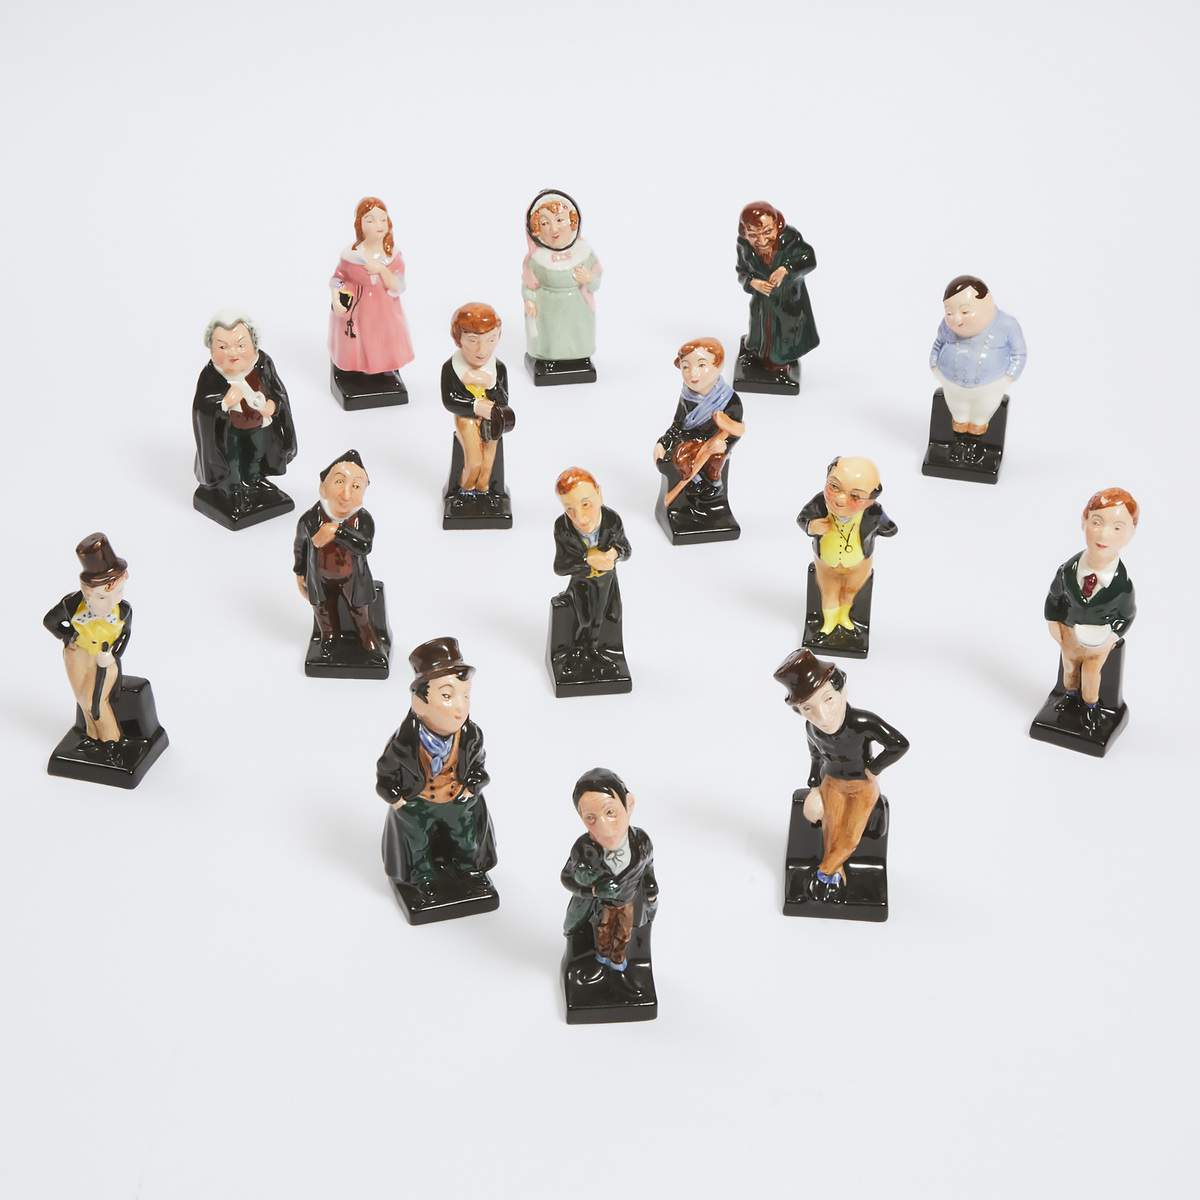 Fifteen Miniature Royal Doulton Charles Dickens Character Figurines, 20th century, largest height 4.